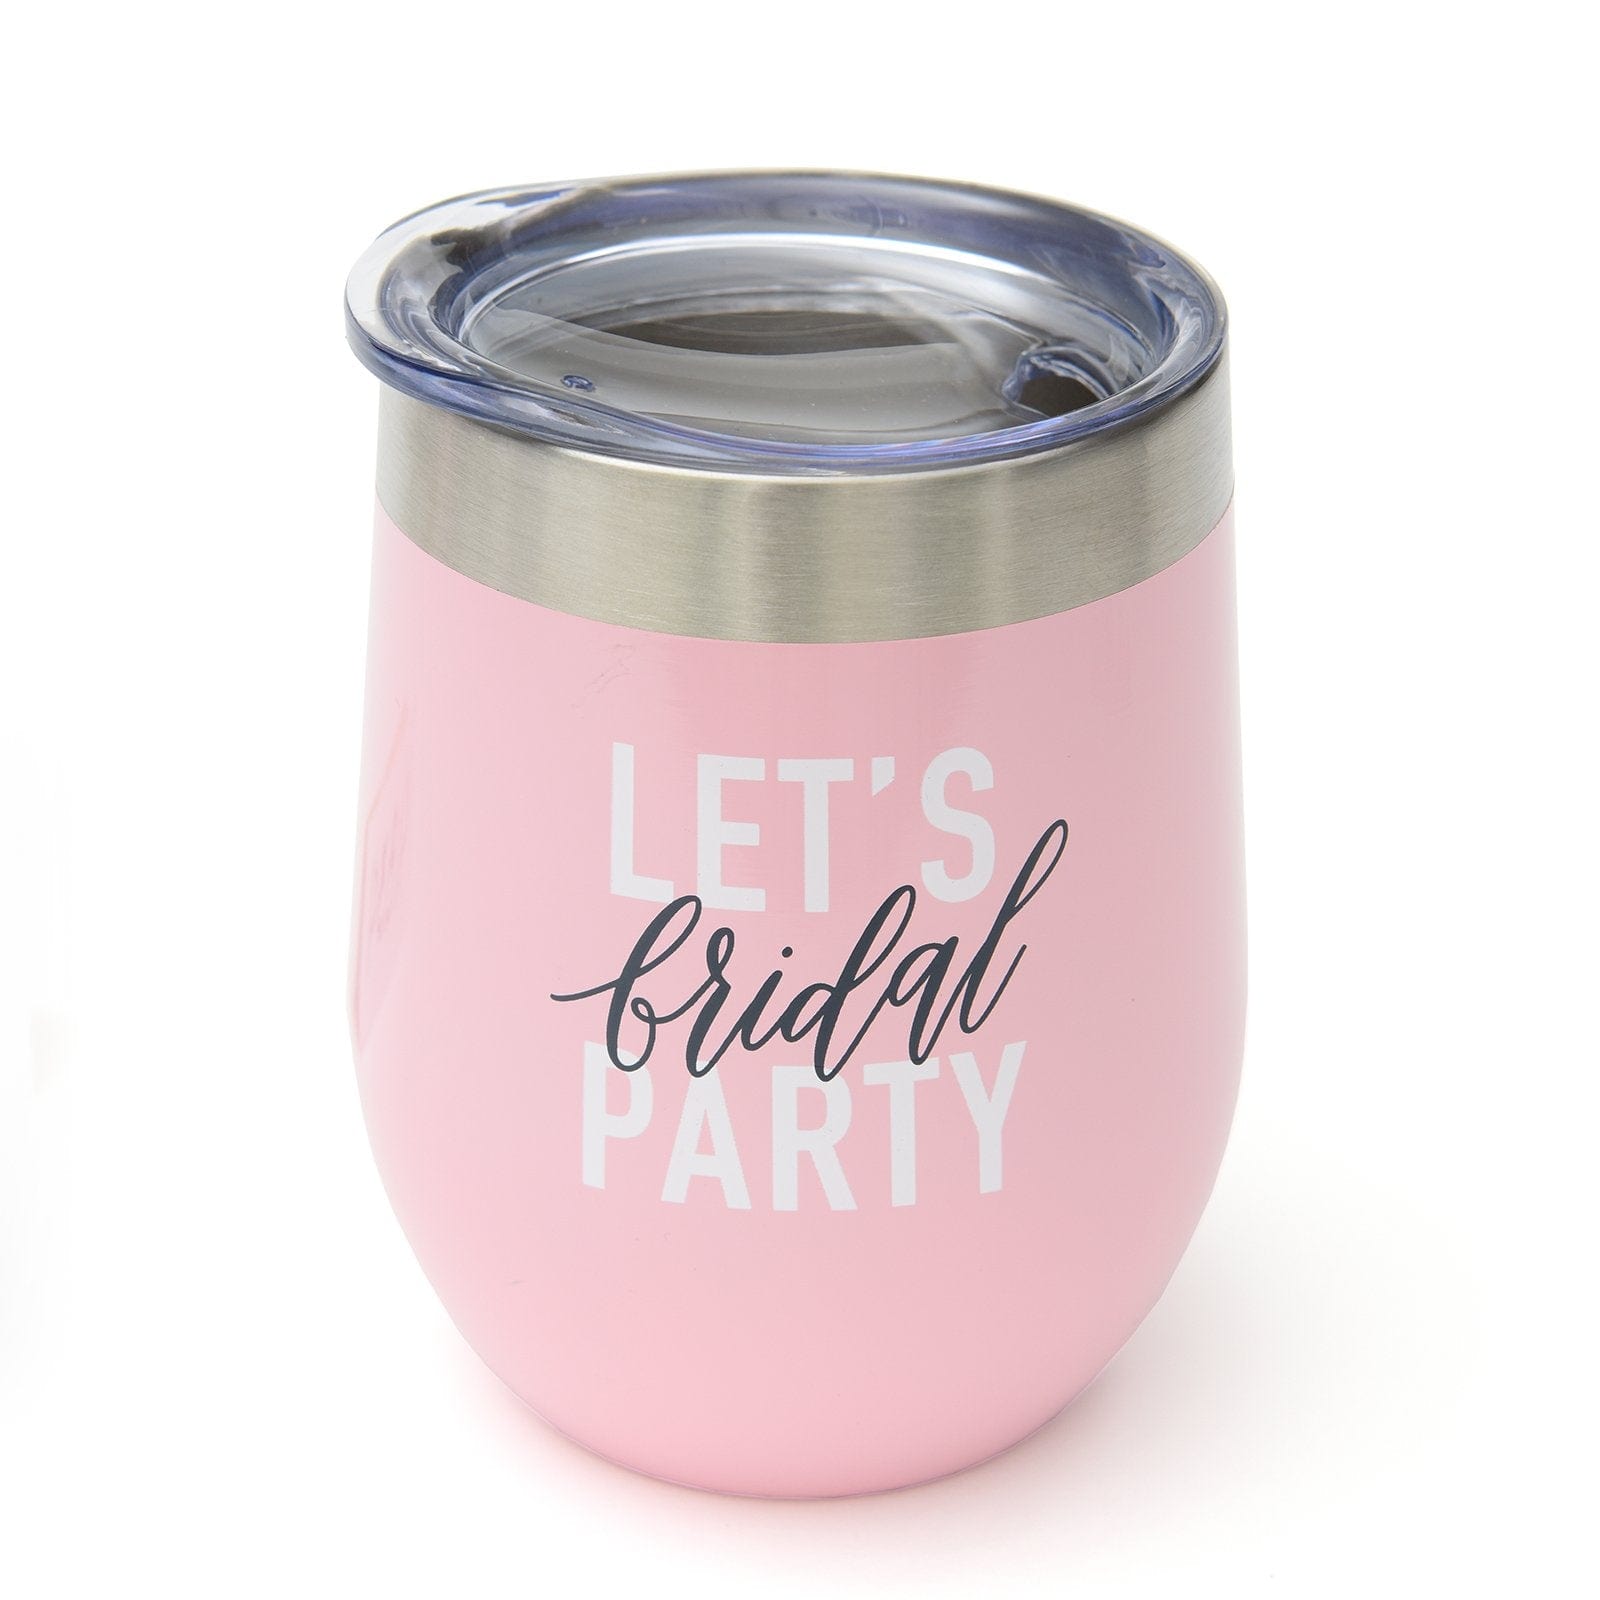 Let's Bridal Party Travel Cup Gartner Studios Drinking Glass 41834